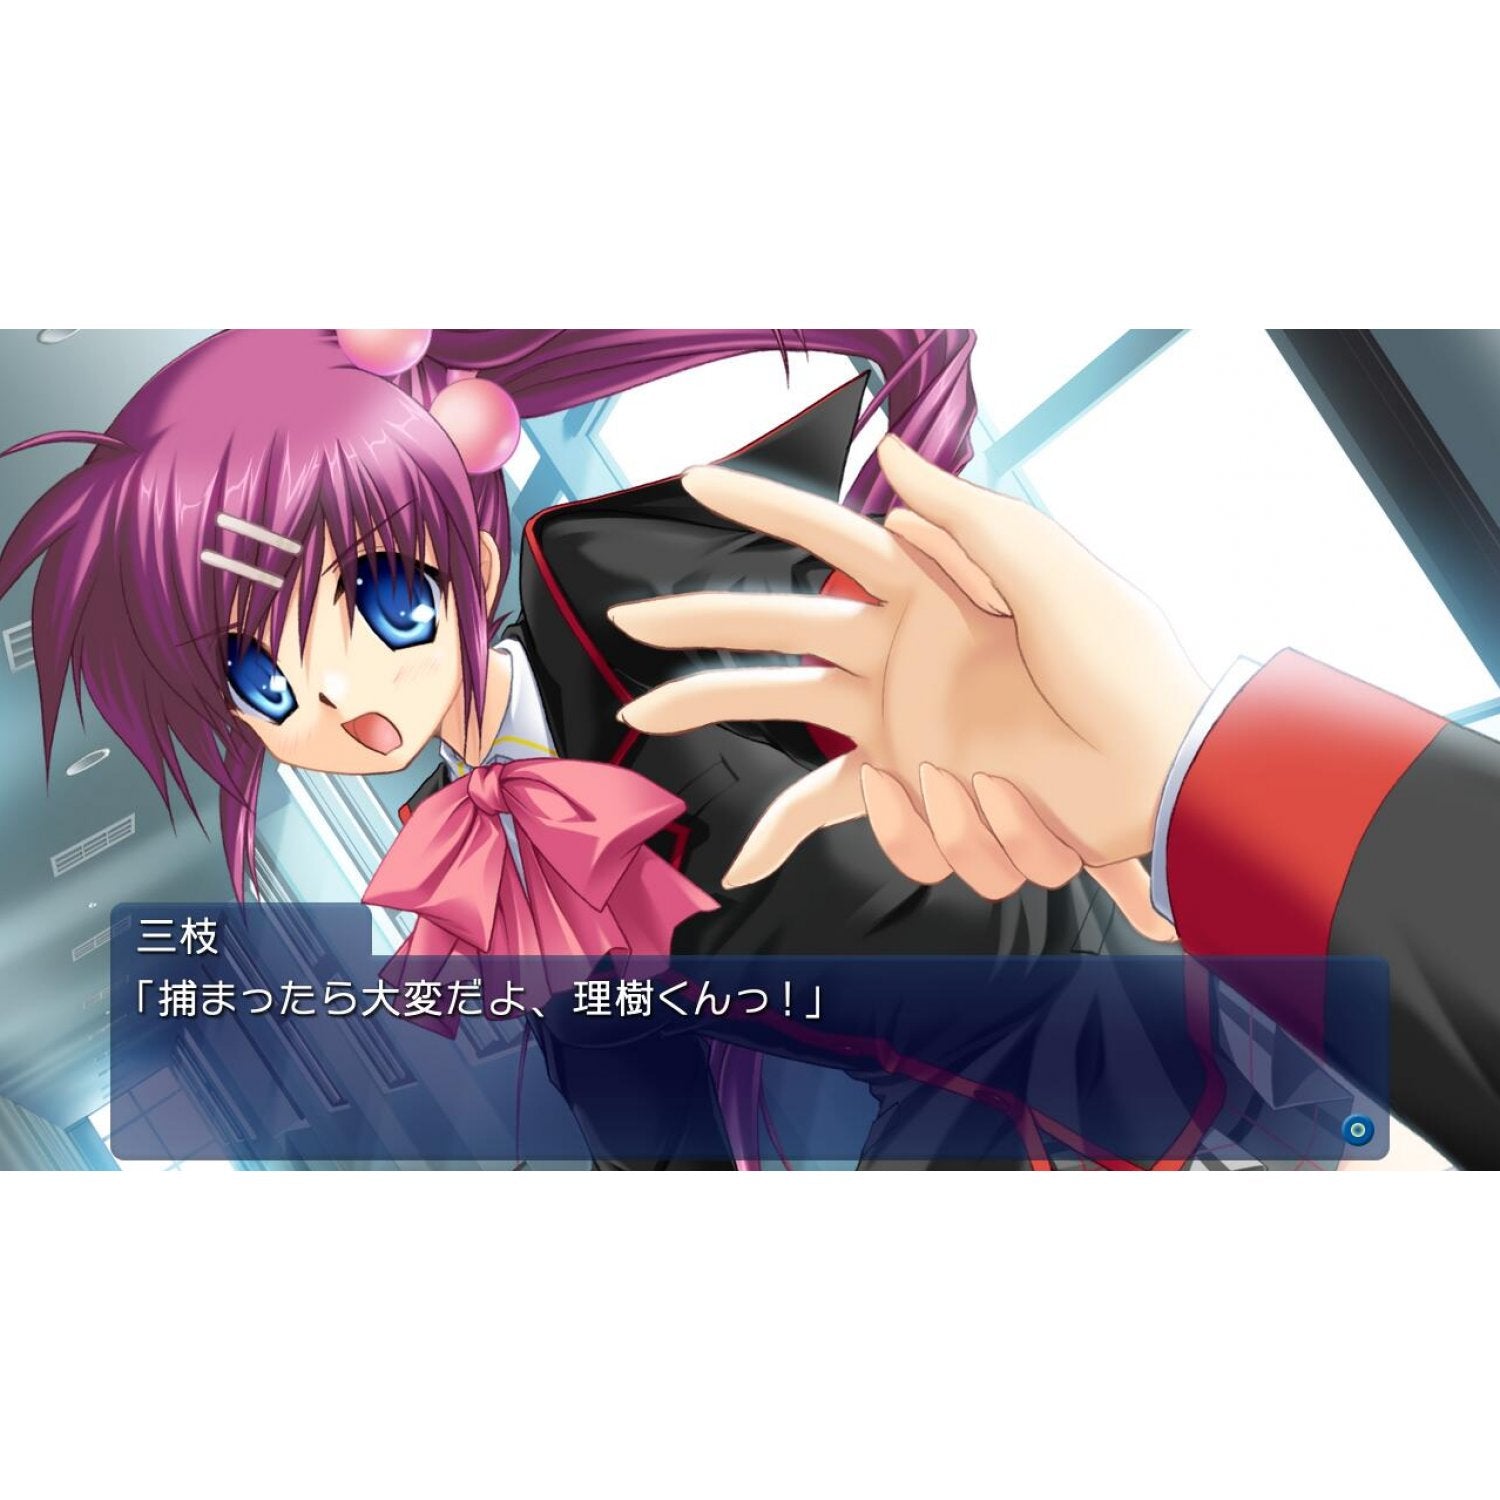 Little Busters! Converted Edition scene b